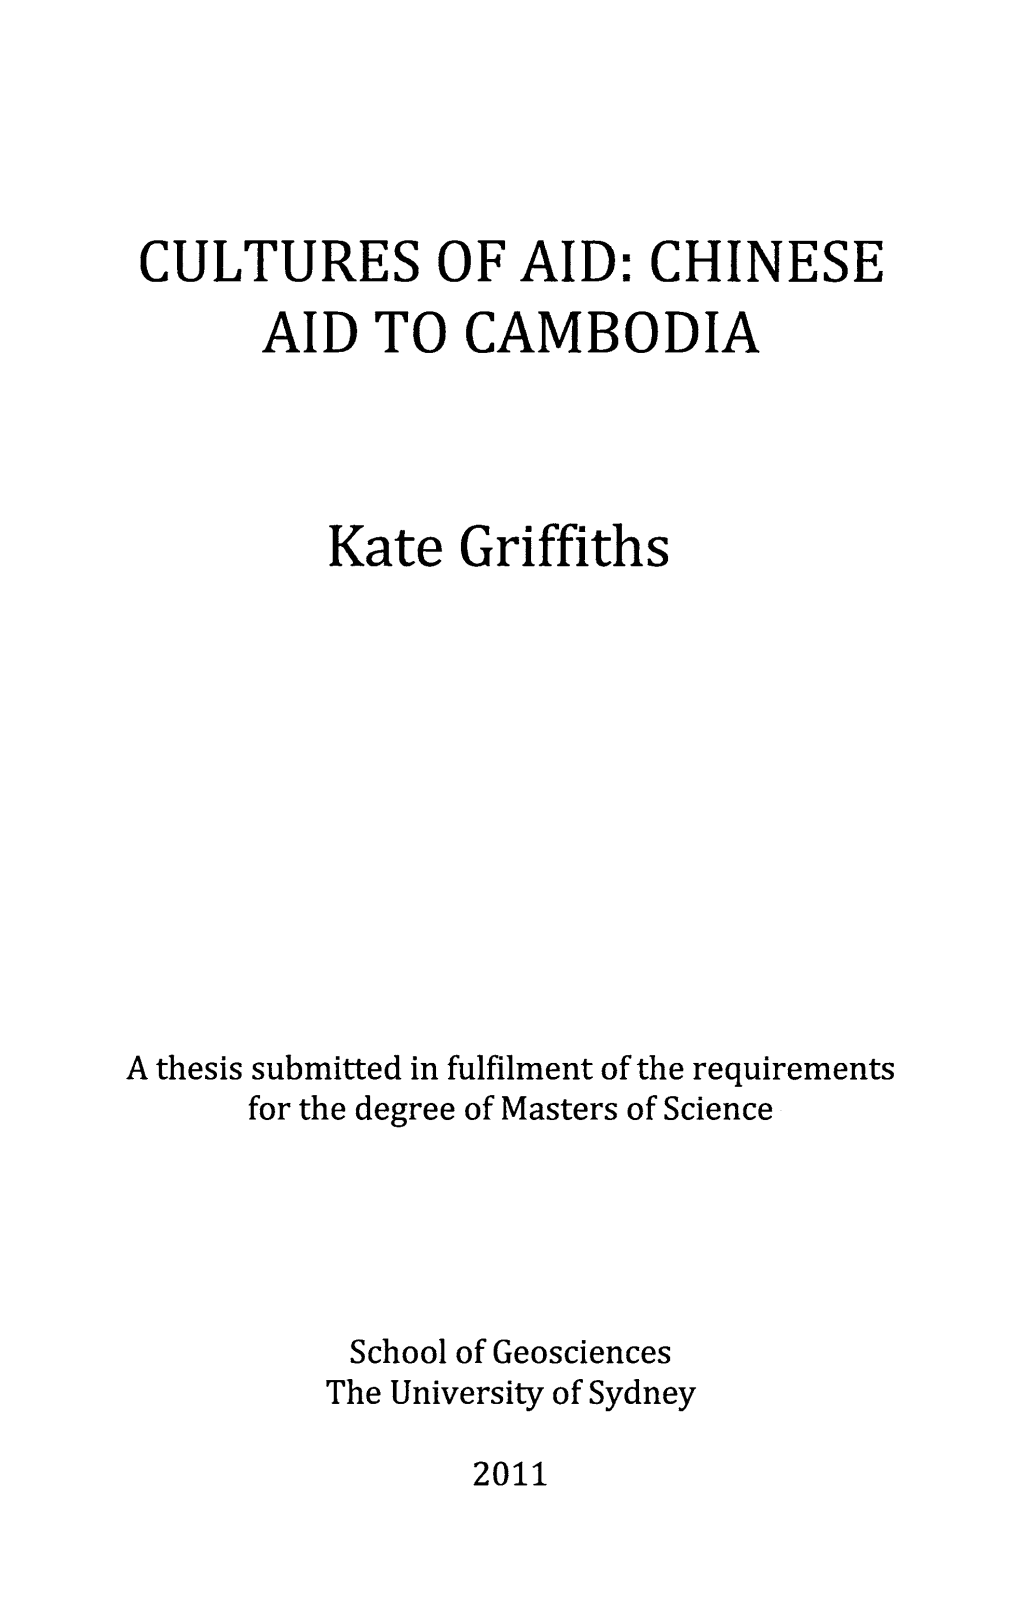 CULTURES of AID: CHINESE AID to CAMBODIA Kate Griffiths